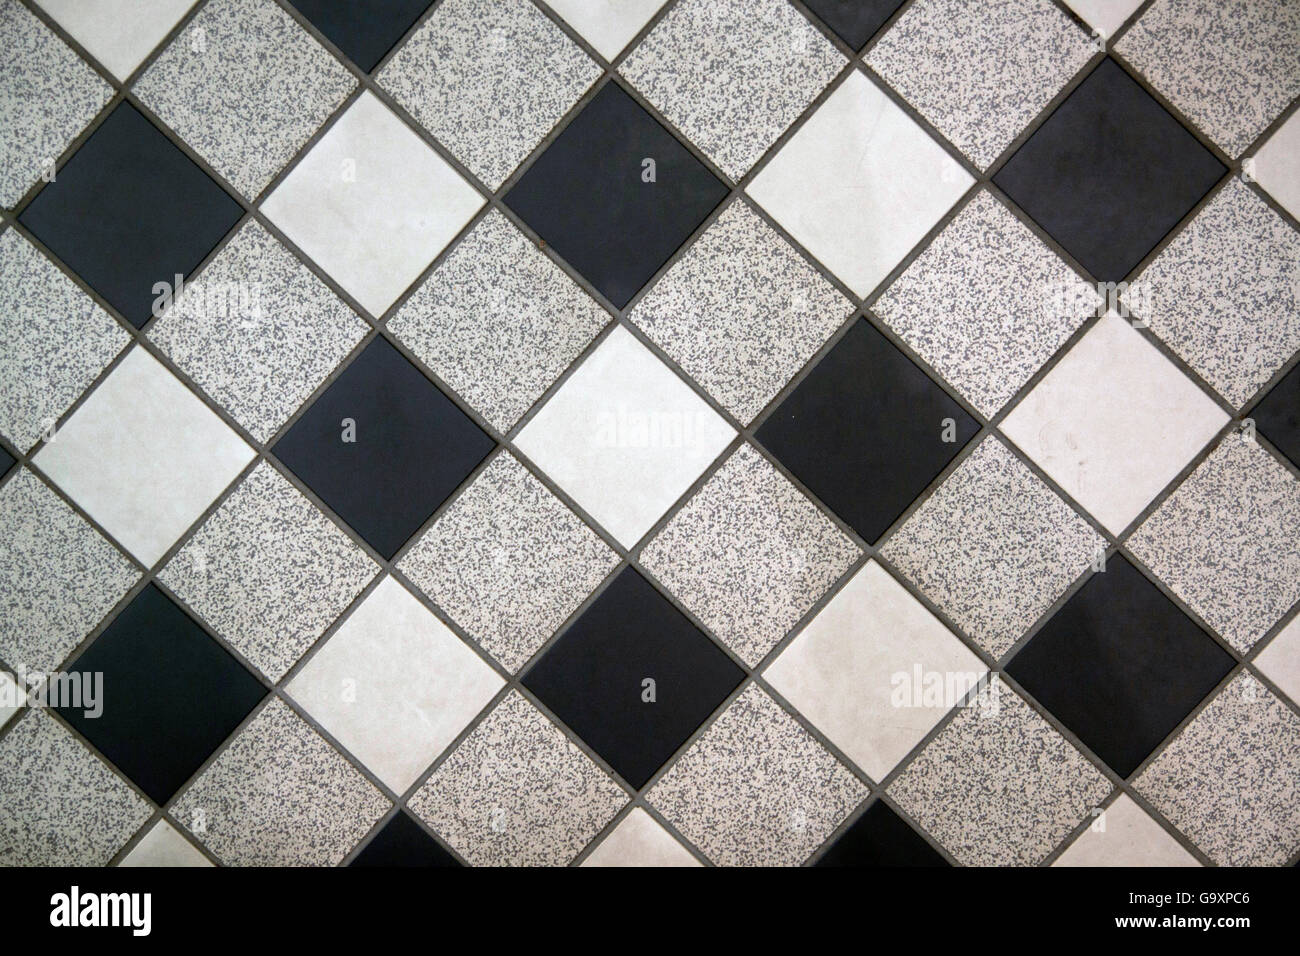 Black White And Gray Checkered Floor Tiles Background Image